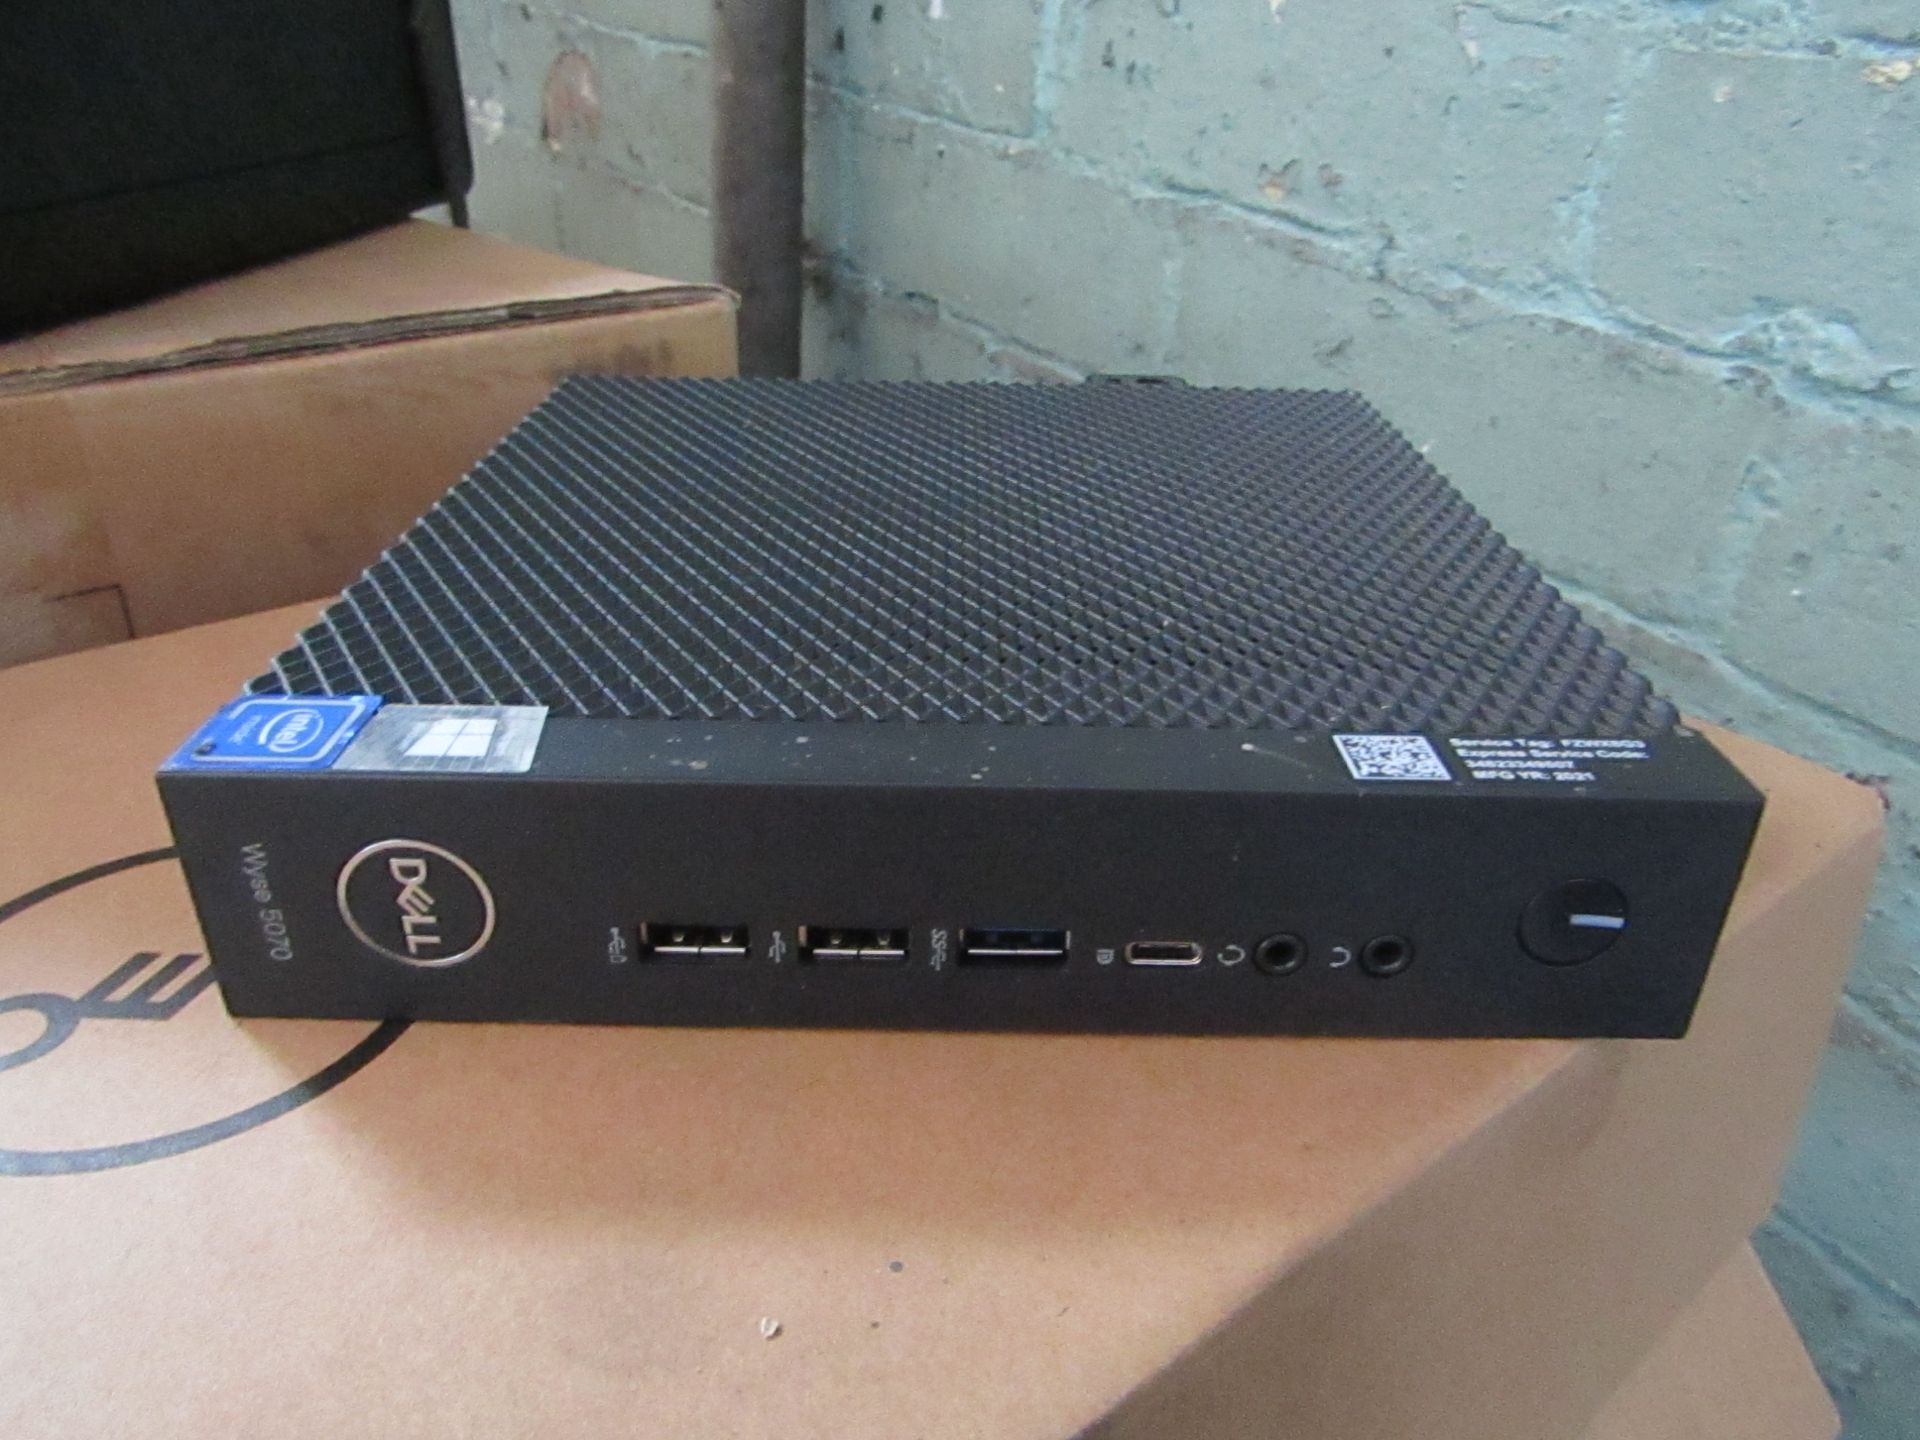 1x Dell Wyse 5070 Business PC - powers on but untested any further- RRP £280